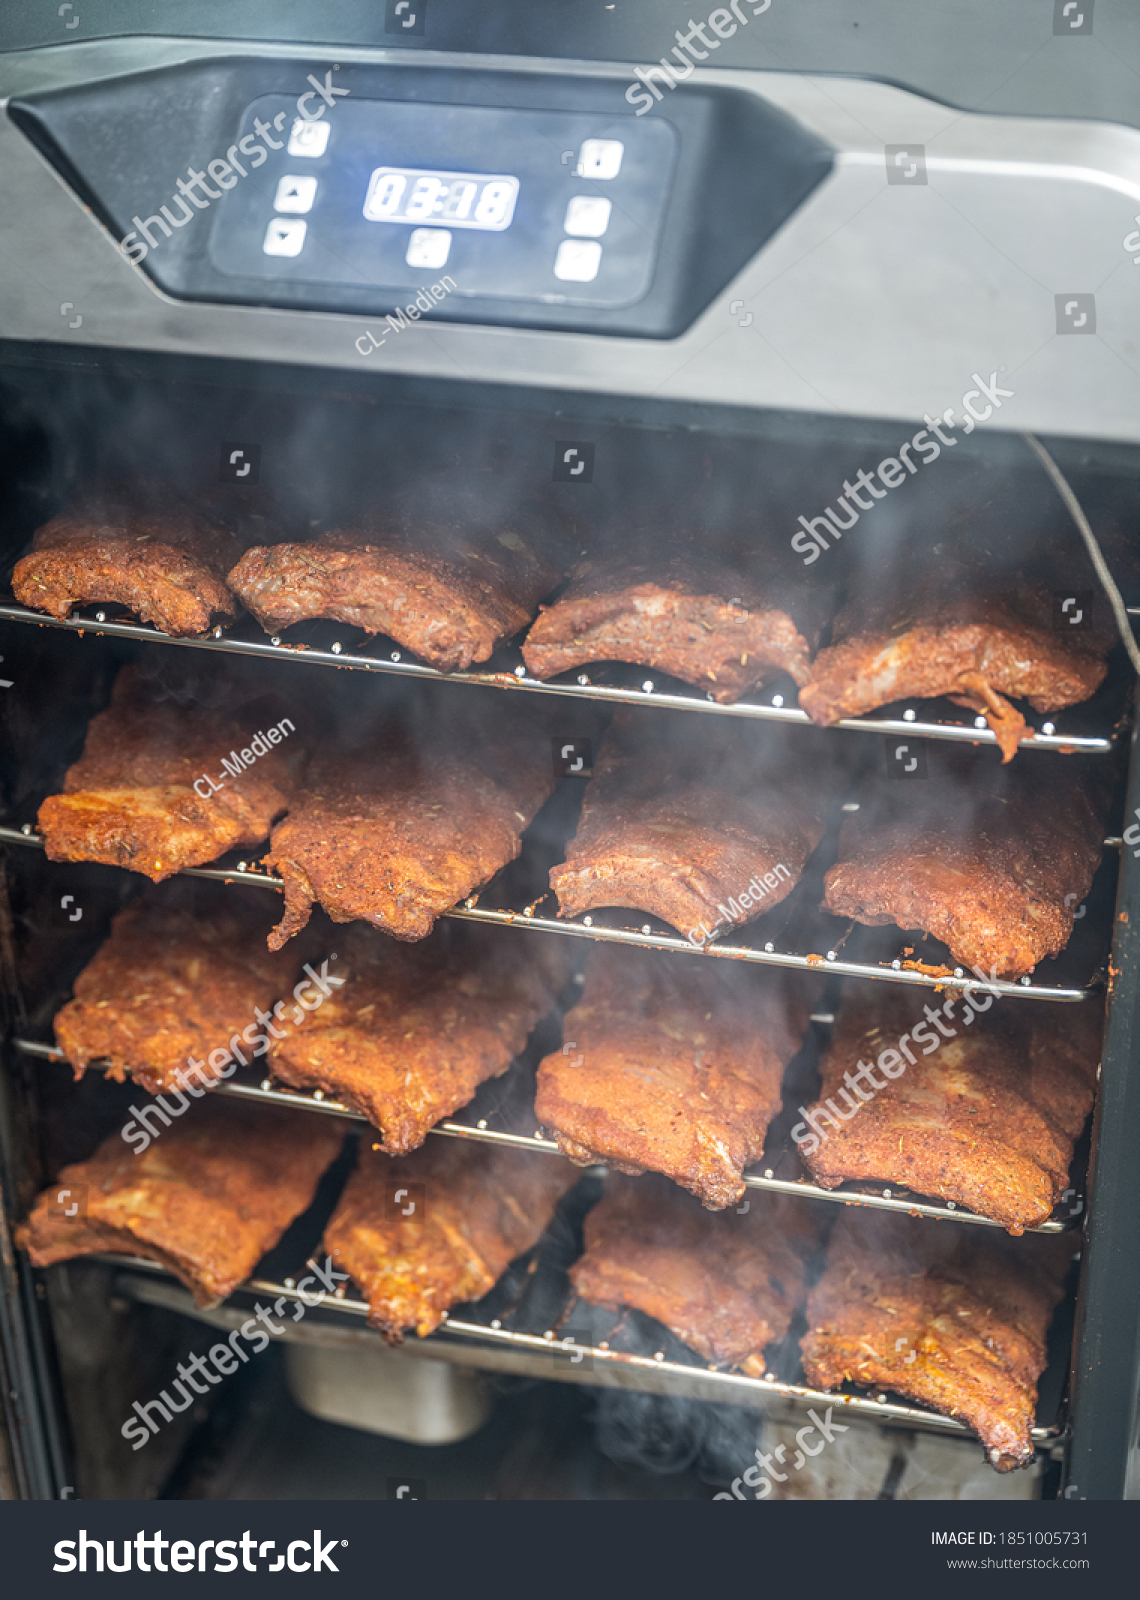 smoke rising around a slow cooked beef brisket on a smoker barbecue grilling concept #1851005731